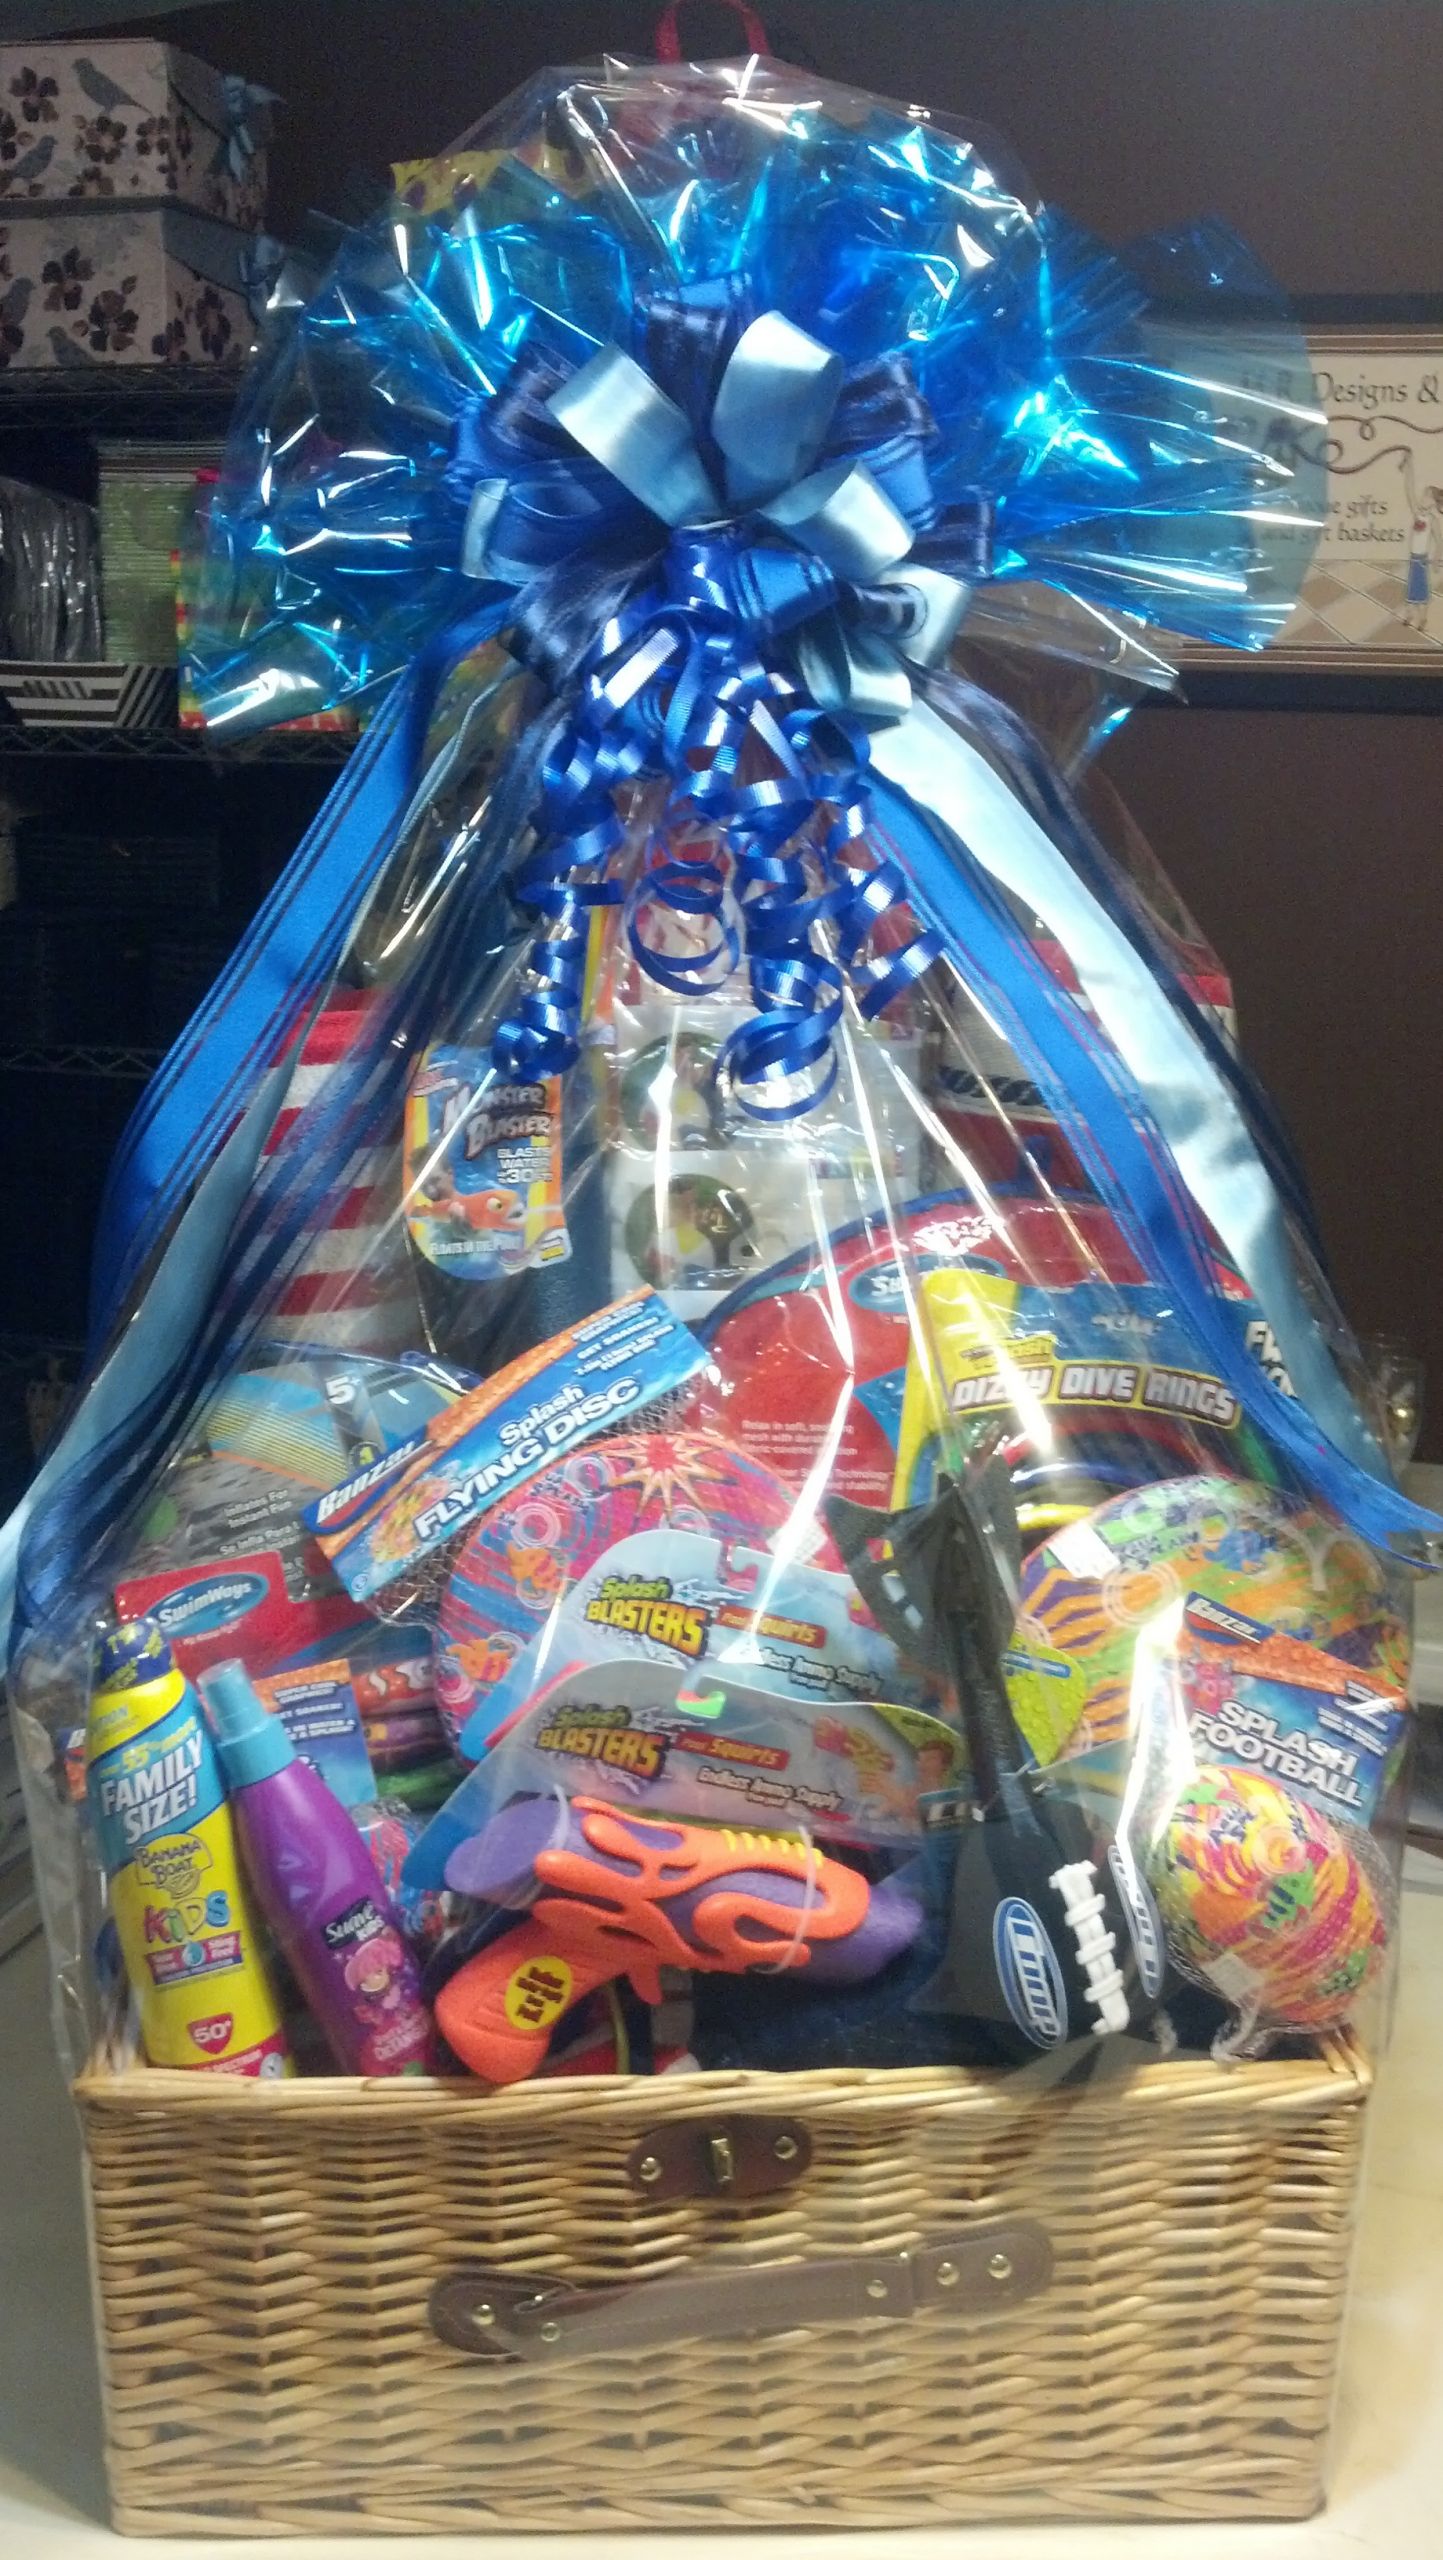 Raffle Gift Basket Ideas
 Special Event and Silent Auction Gift Basket Ideas by M R